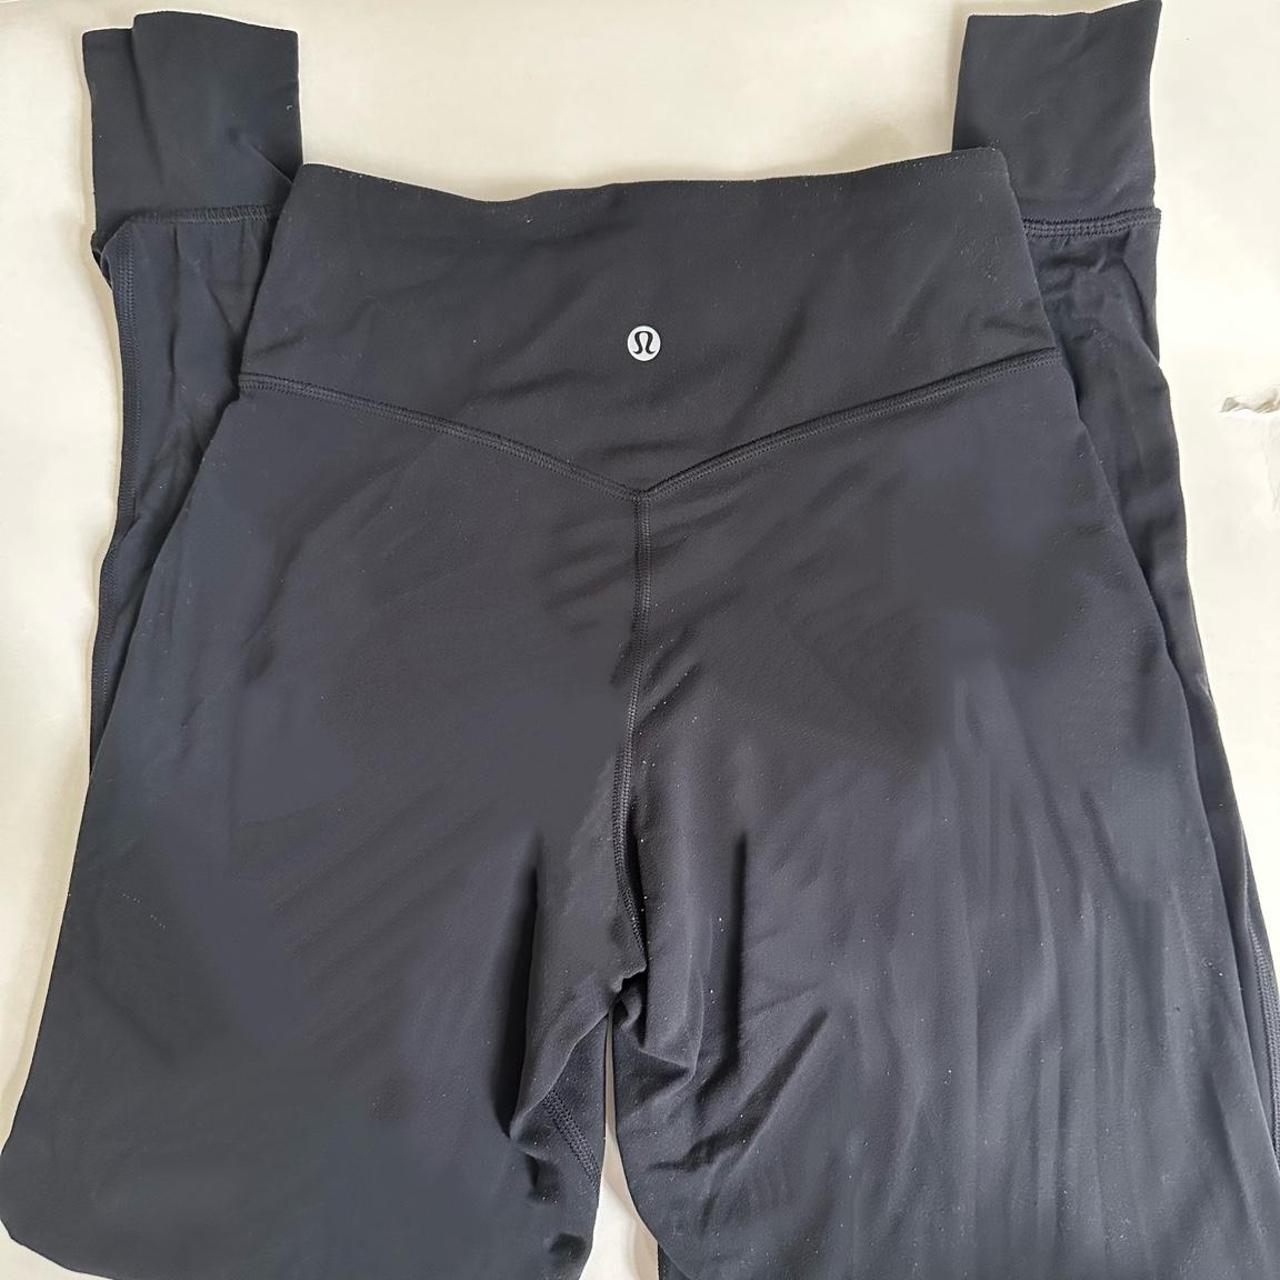 Lululemon Align Joggers in Black- Size 4, (there is